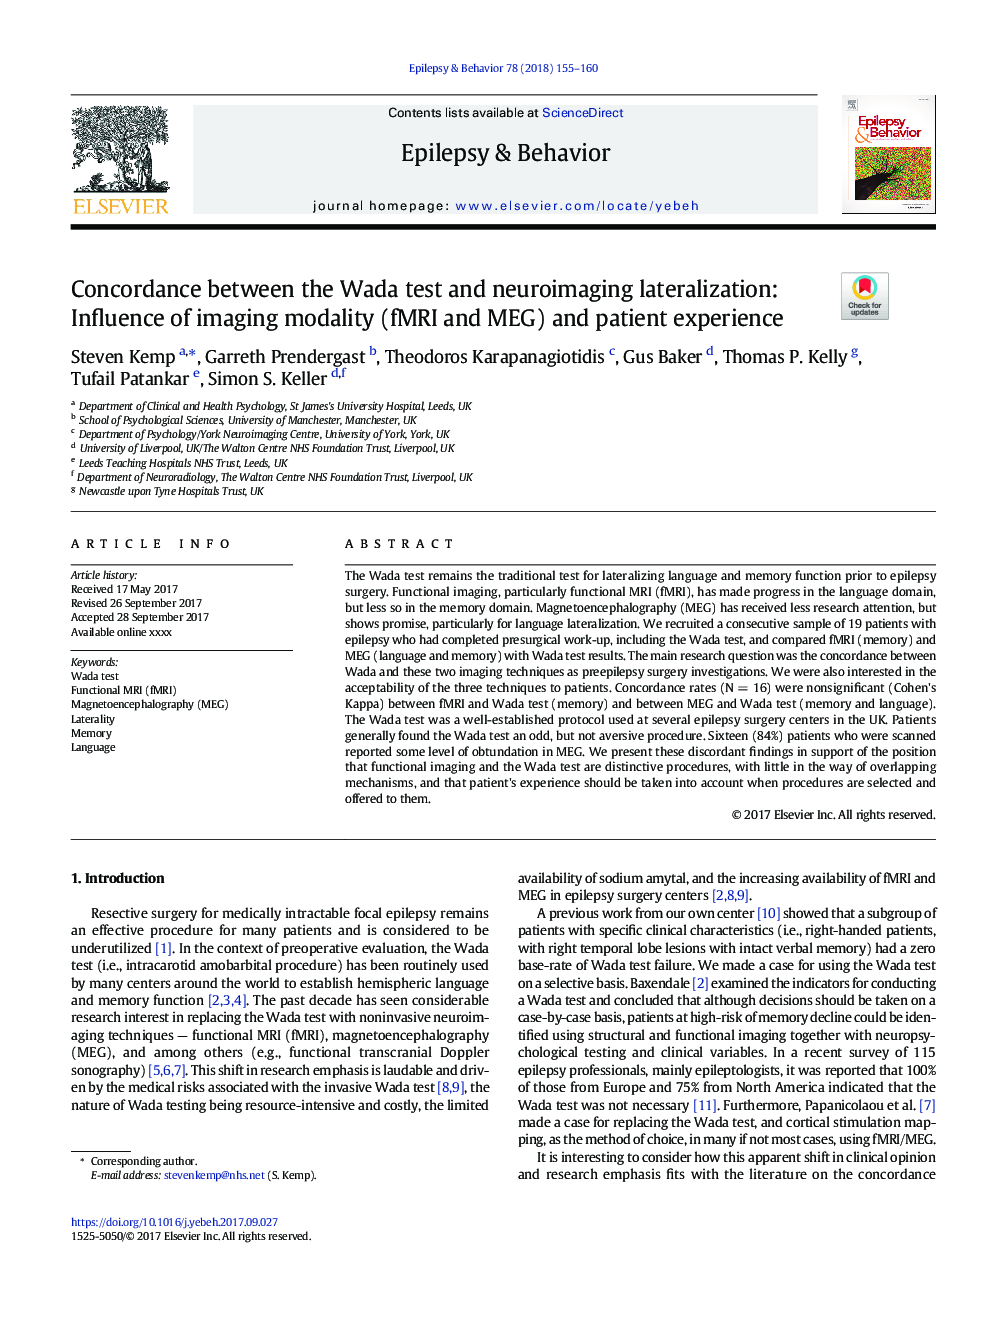 Concordance between the Wada test and neuroimaging lateralization: Influence of imaging modality (fMRI and MEG) and patient experience